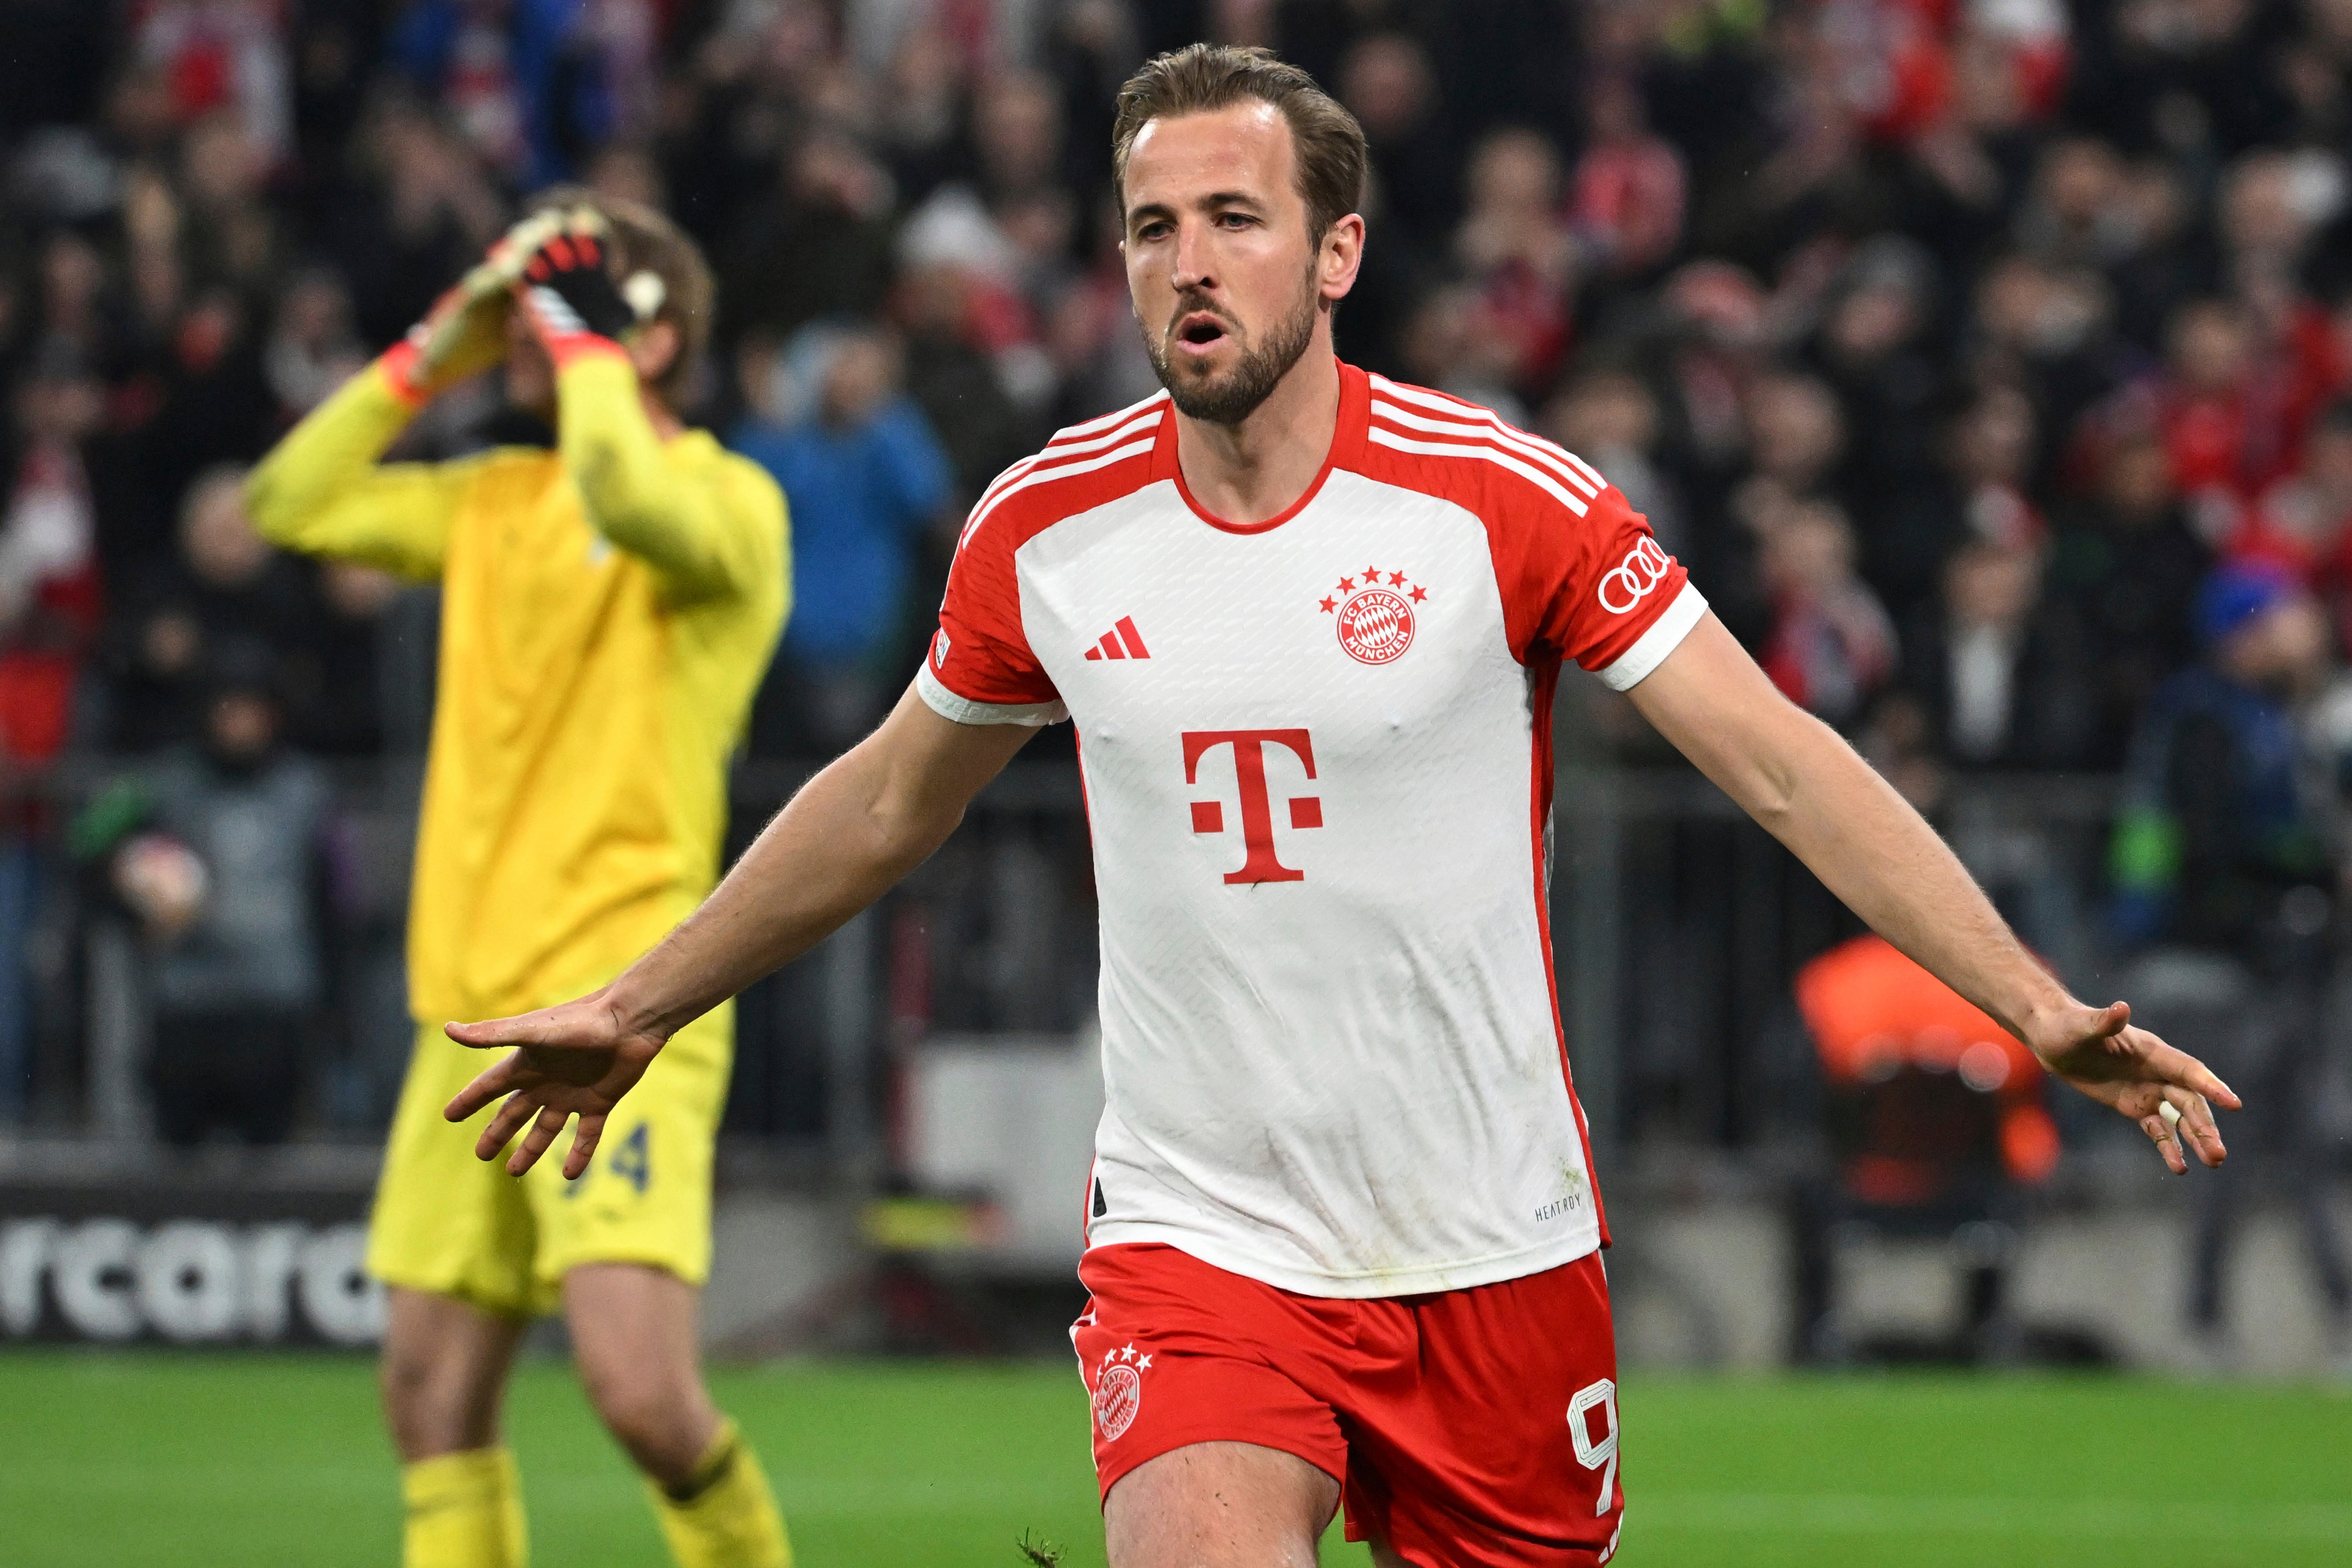 Harry Kane scored a crucial double for Bayern